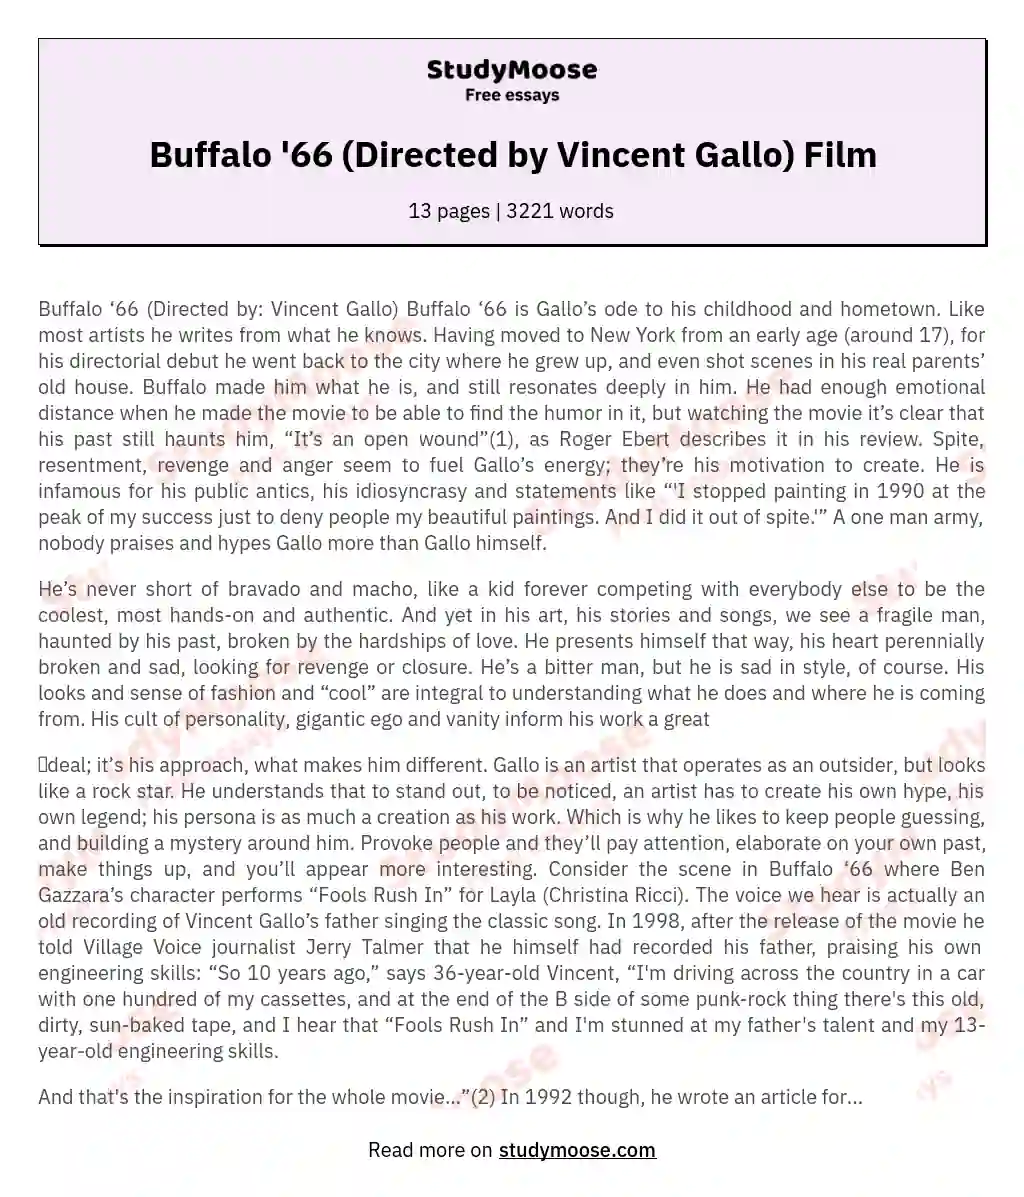 Buffalo '66 (Directed by Vincent Gallo) Film essay